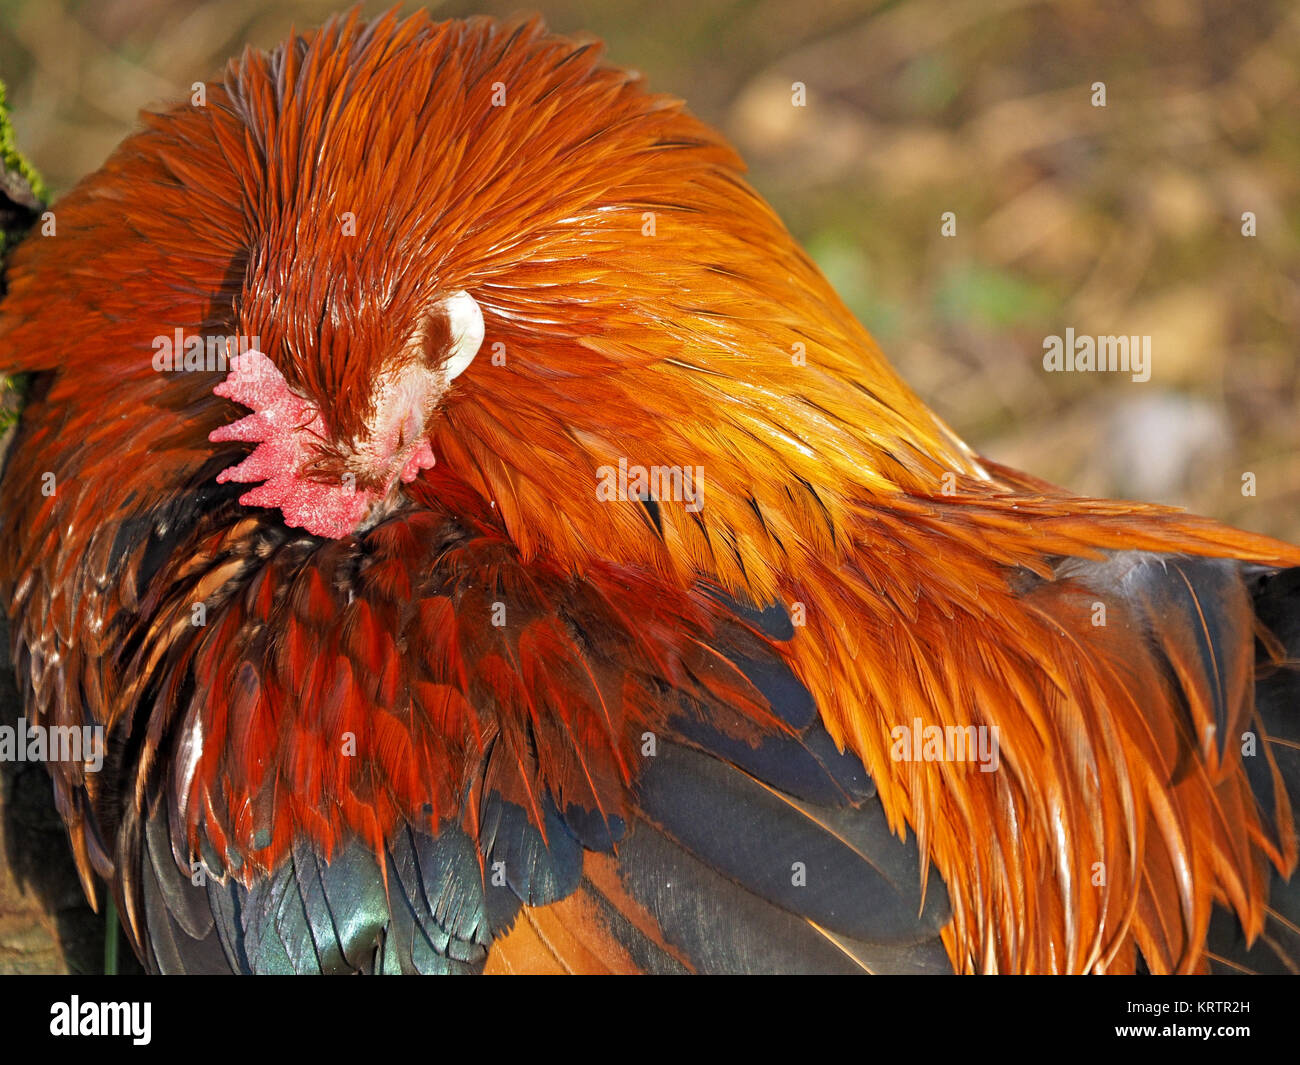 fine feathers of preening Single comb brown leghorn cockerel an old breed make almost abstract pattern in Cumbria, England, UK Stock Photo